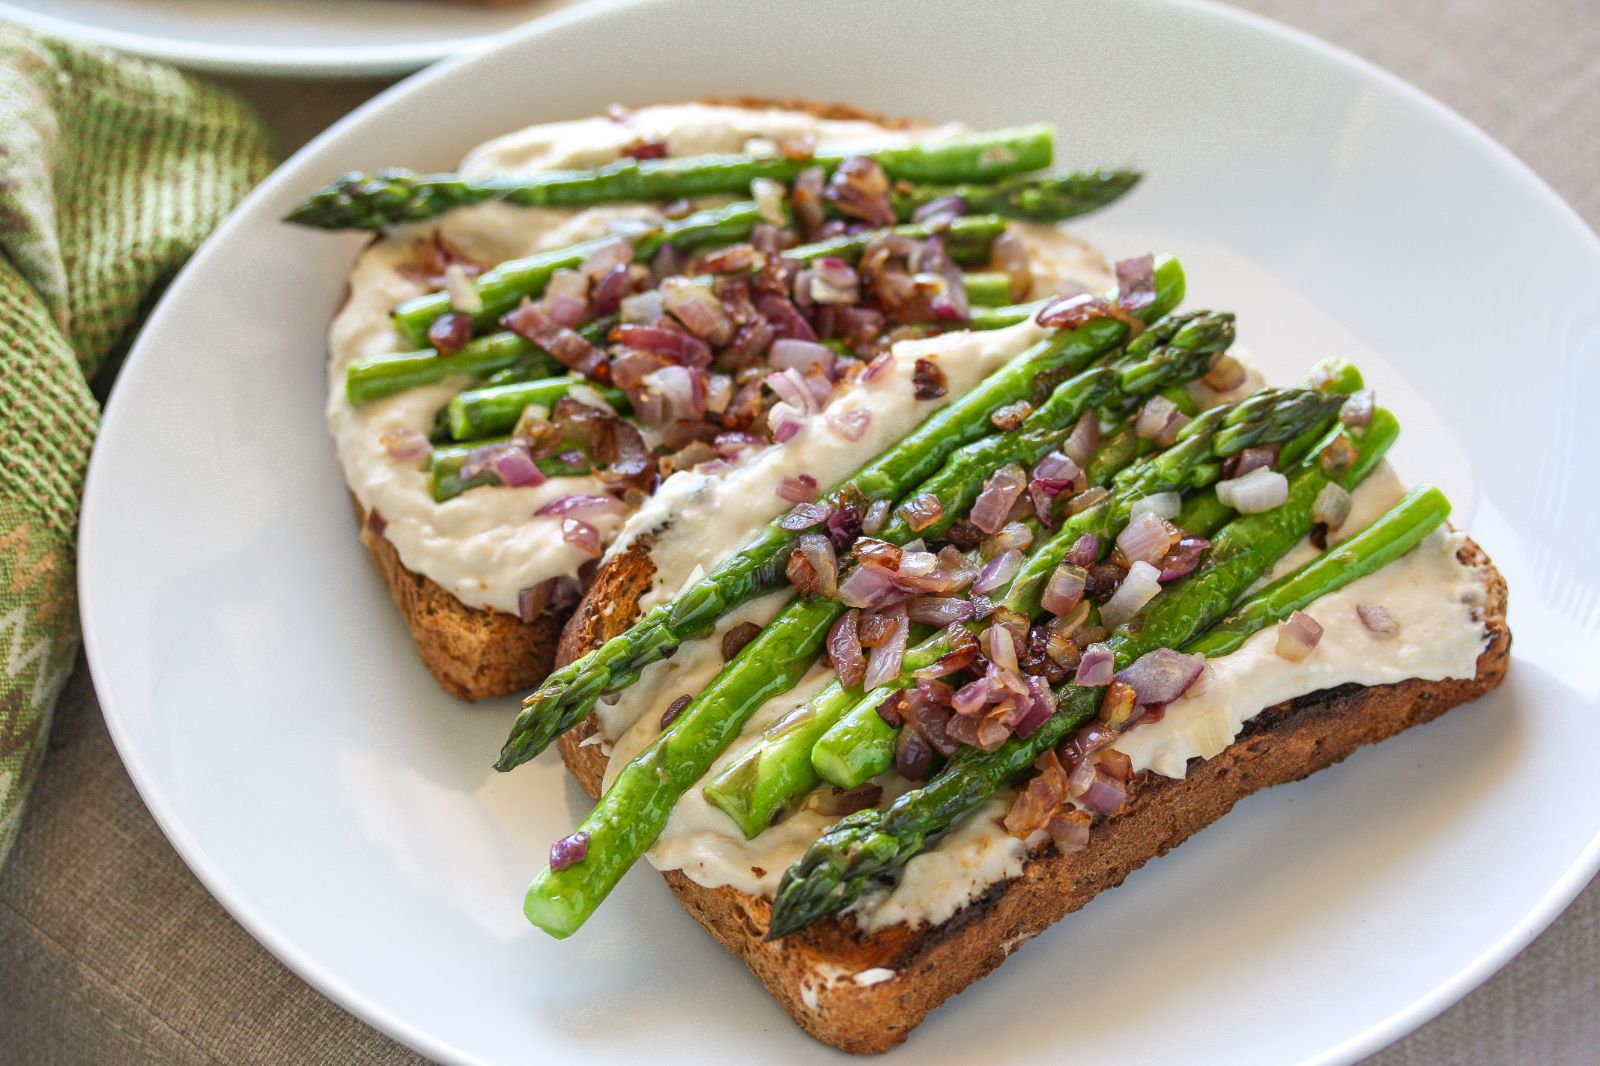 Toast with white bean dip, pan-fried asparagus and red onion